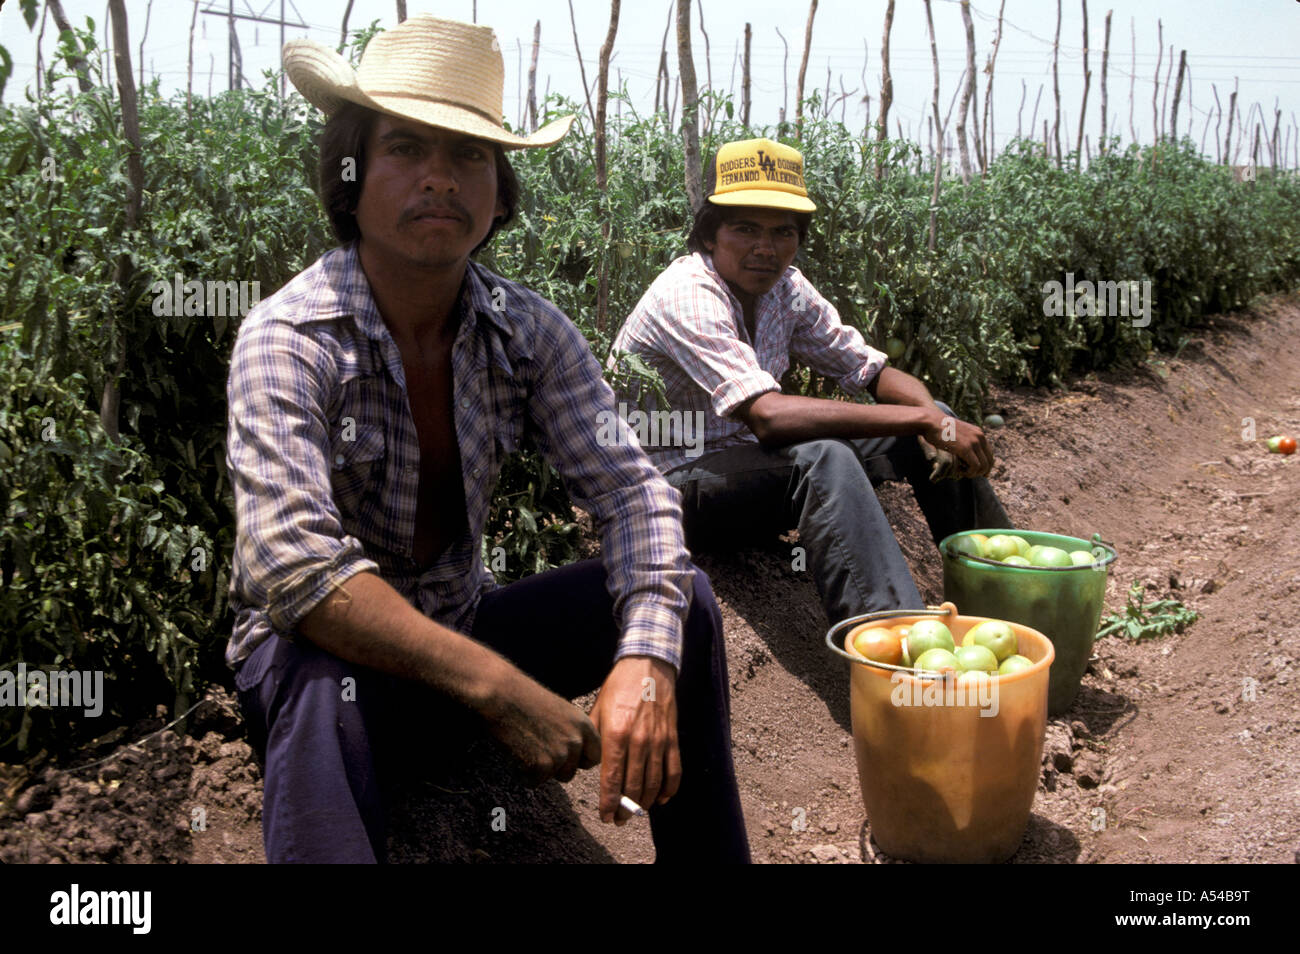 Painet hn1820 4060 mexico hispanic tomato harvesters men rest sonoma country developing nation less economically developed Stock Photo